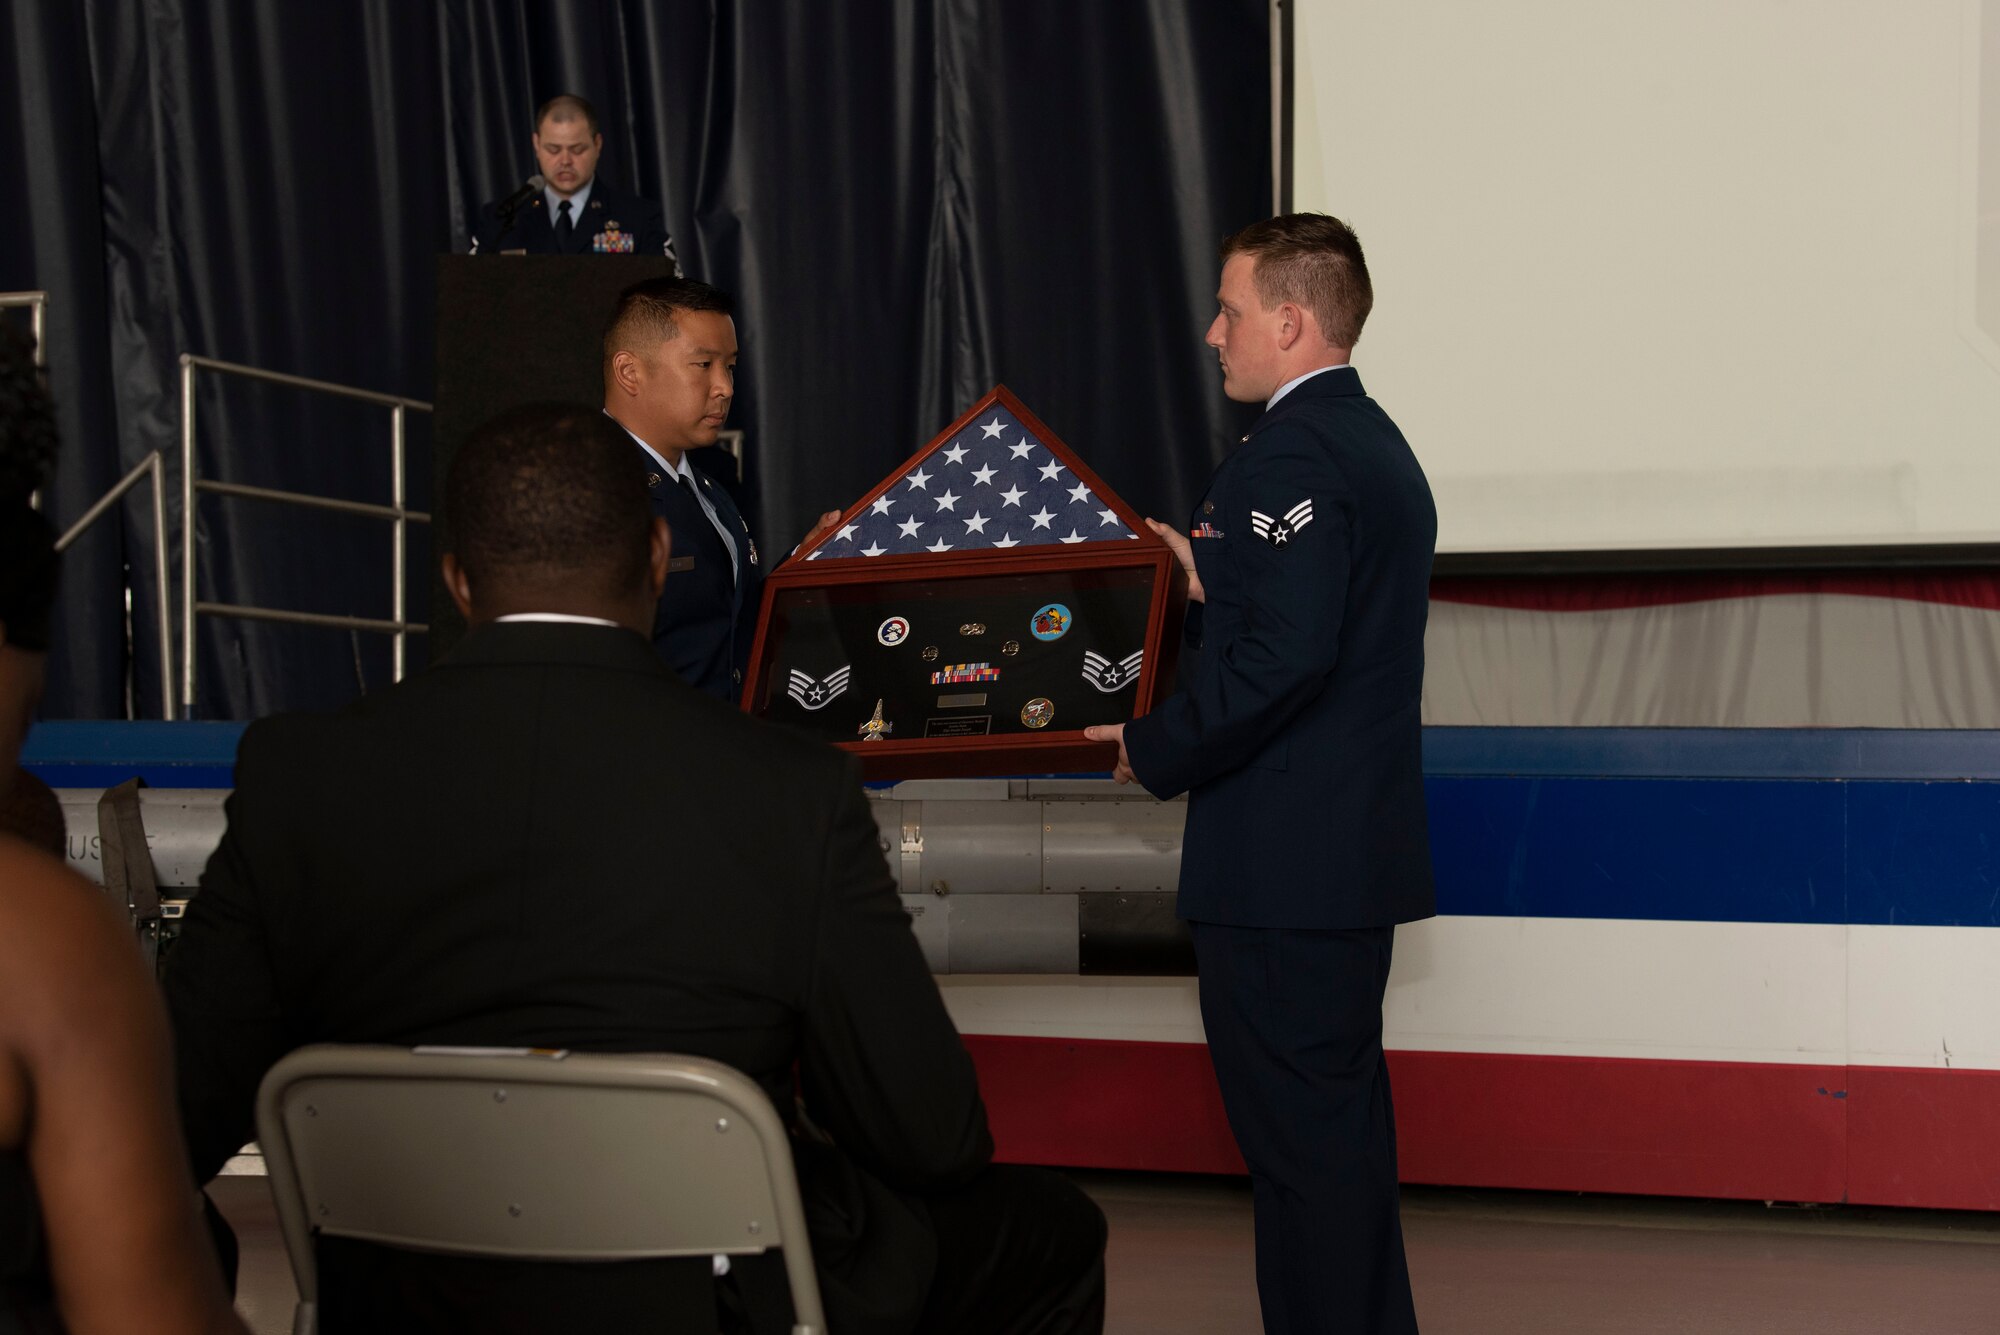 U.S. Air Force Staff Sgt. Amalia Joseph’s, 20th Component Maintenance Squadron electronic warfare journeyman, shadow box is presented to her husband during a memorial service at Shaw Air Force Base, South Carolina, June 7, 2019